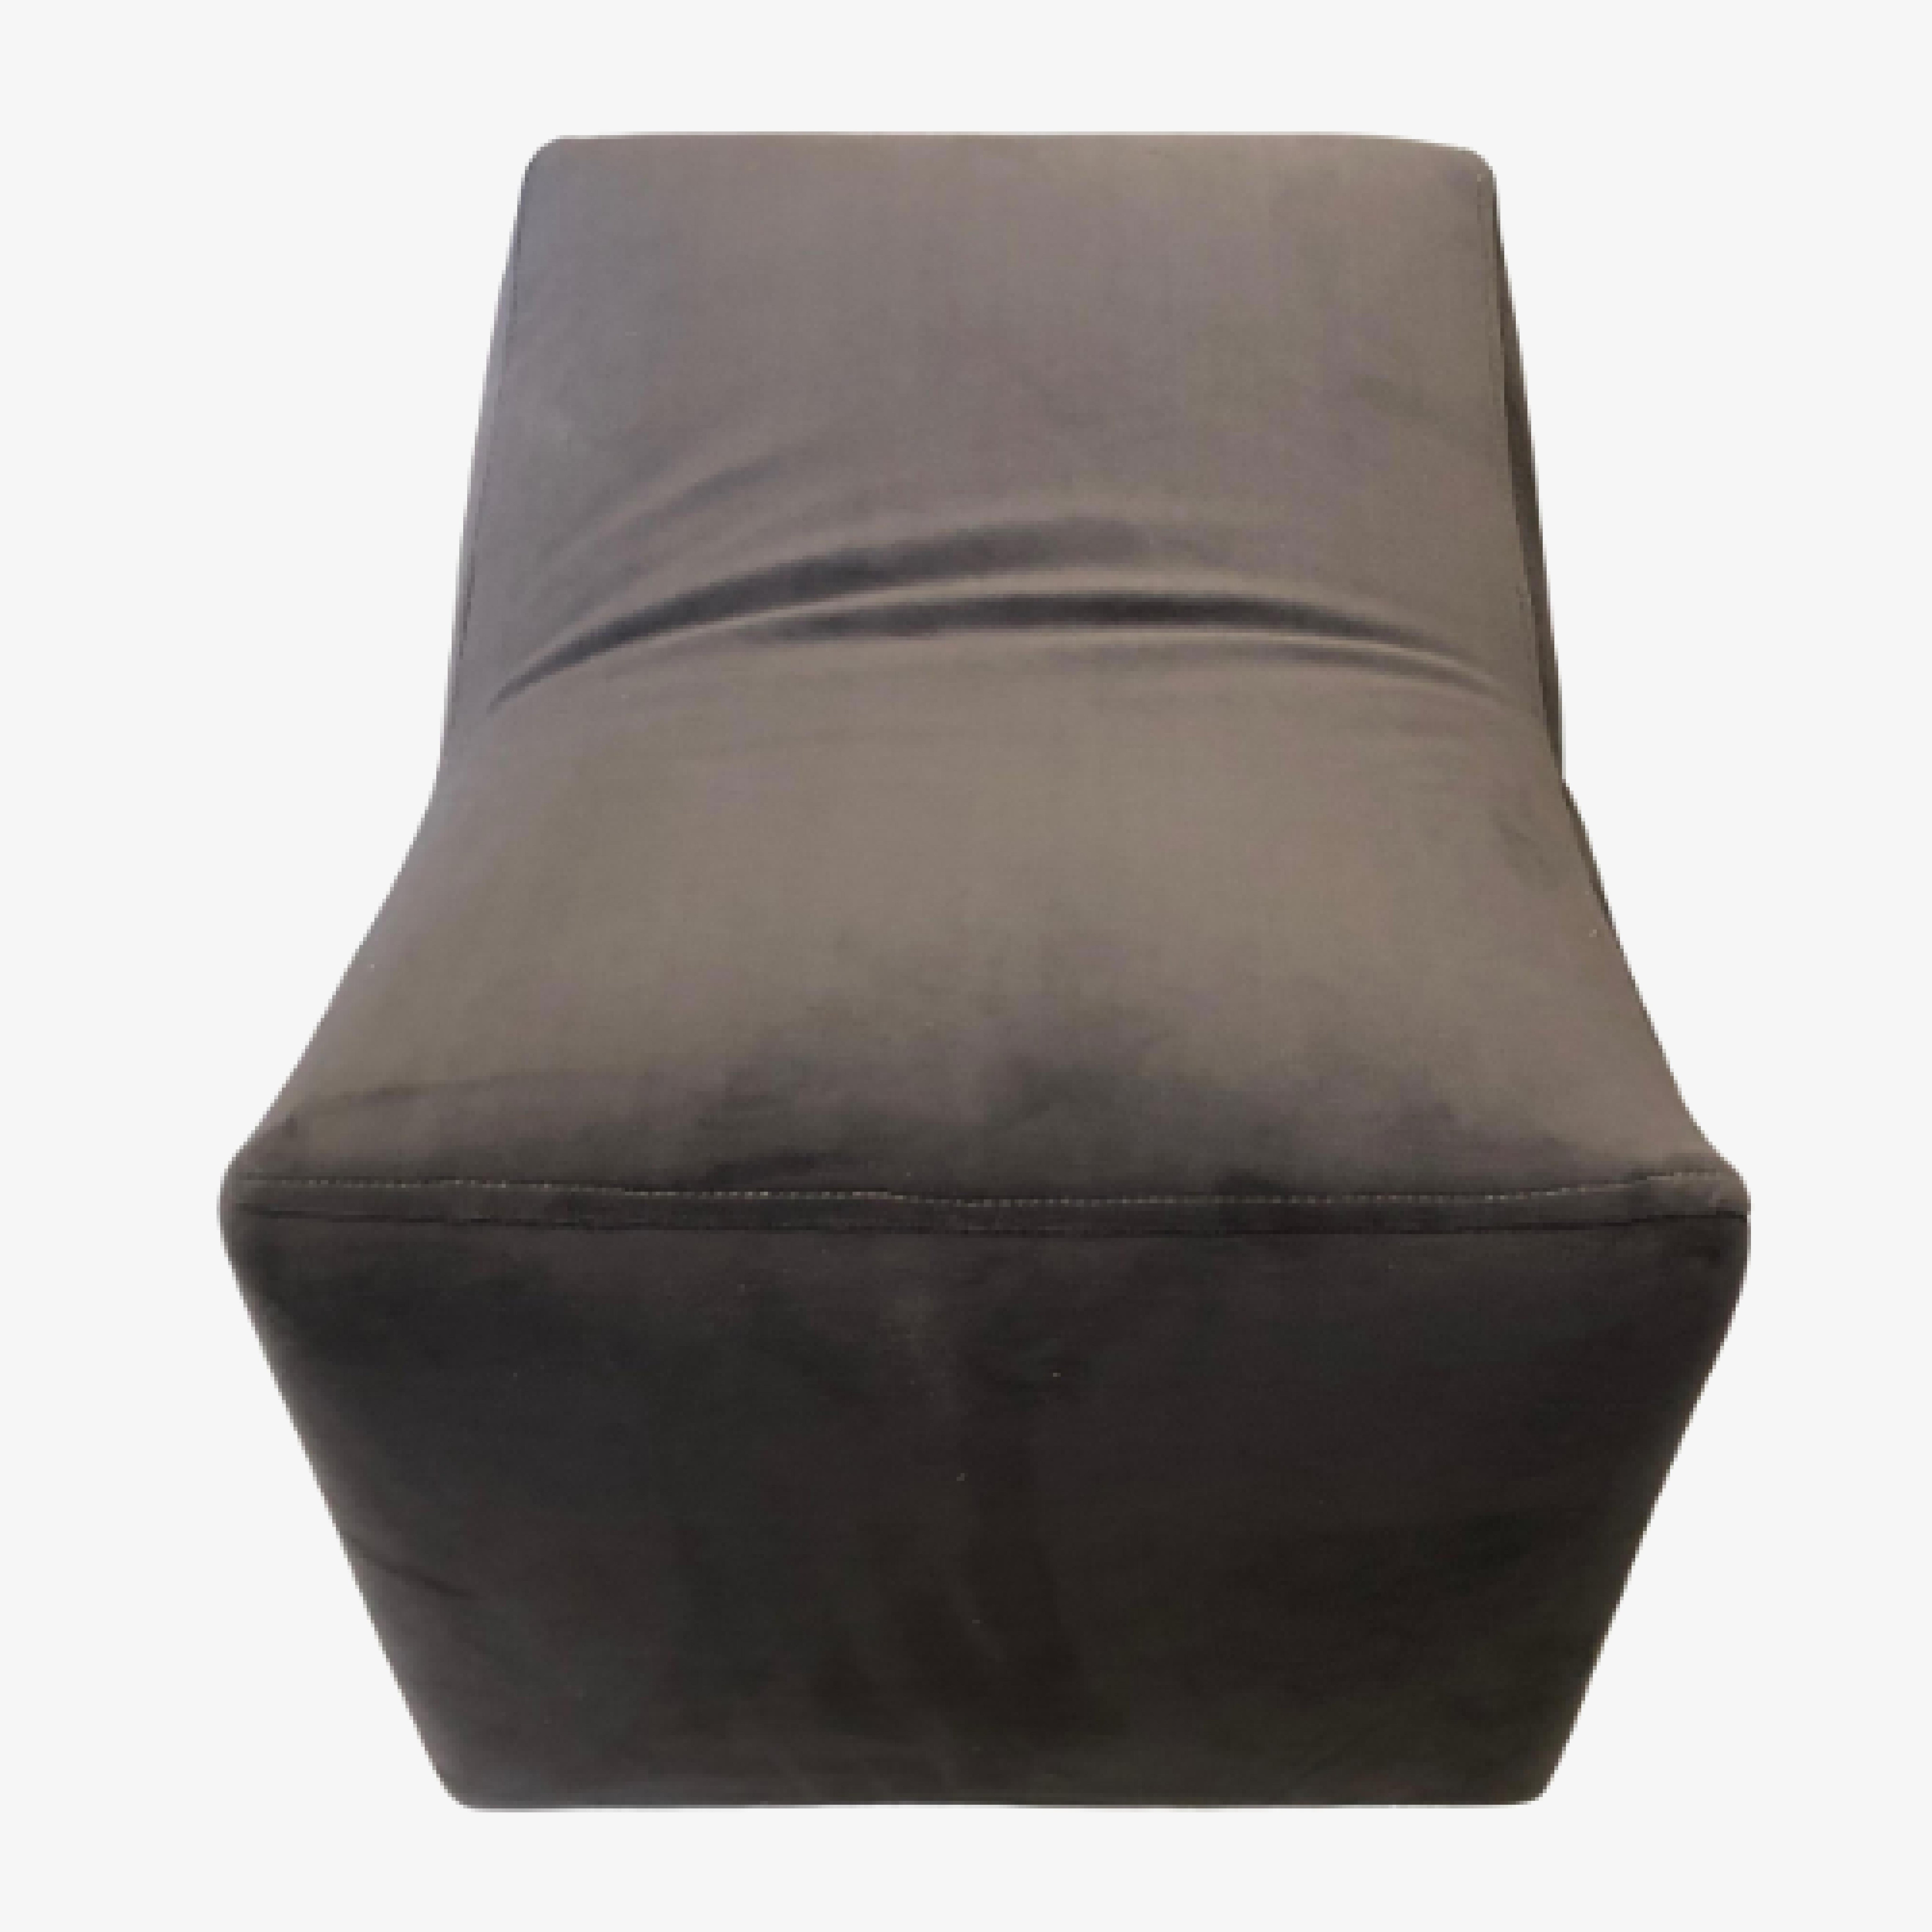 The saddle ottoman was designed in 1965 by leading modern furniture designer Milo Baughman for Thayer Coggin. This ottoman is modern and unique, with a distinctive silhouette, featuring an elegantly curved front and back frame and hidden casters for